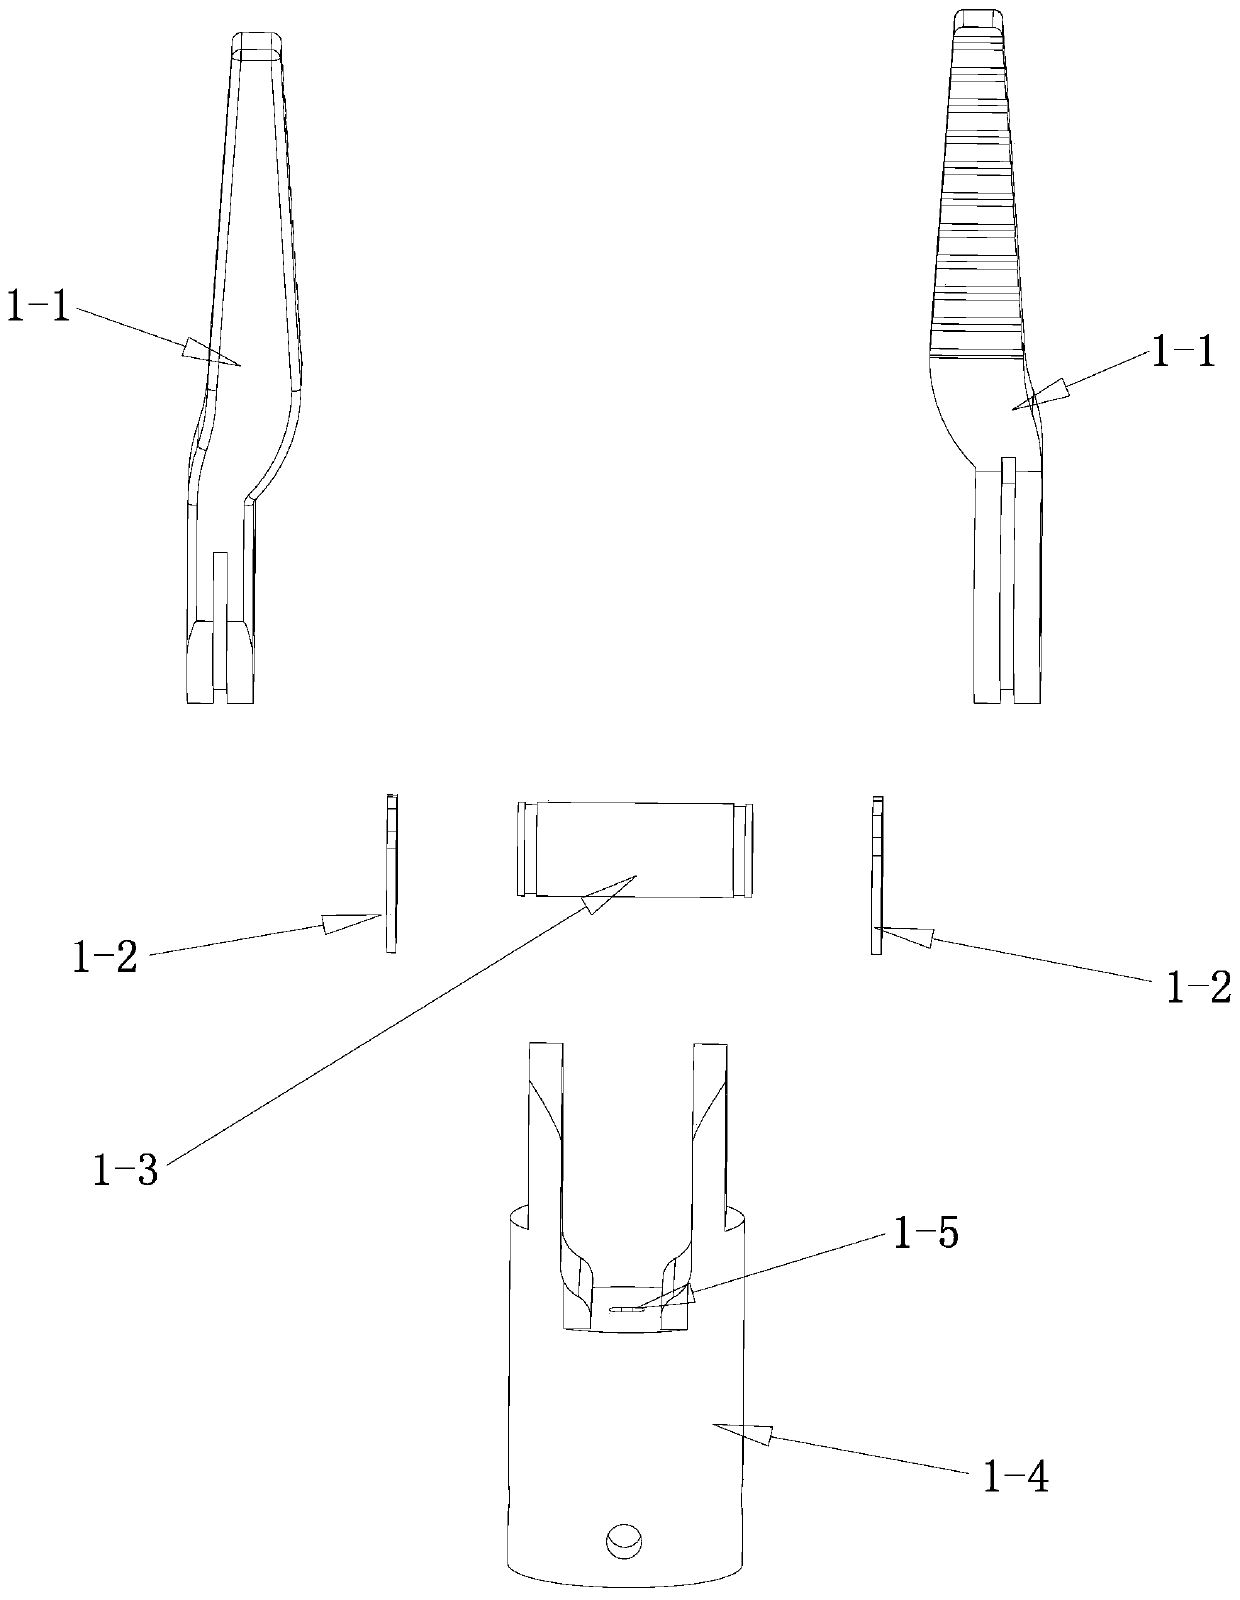 A hand-held flexible multi-joint surgical instrument for minimally invasive abdominal surgery